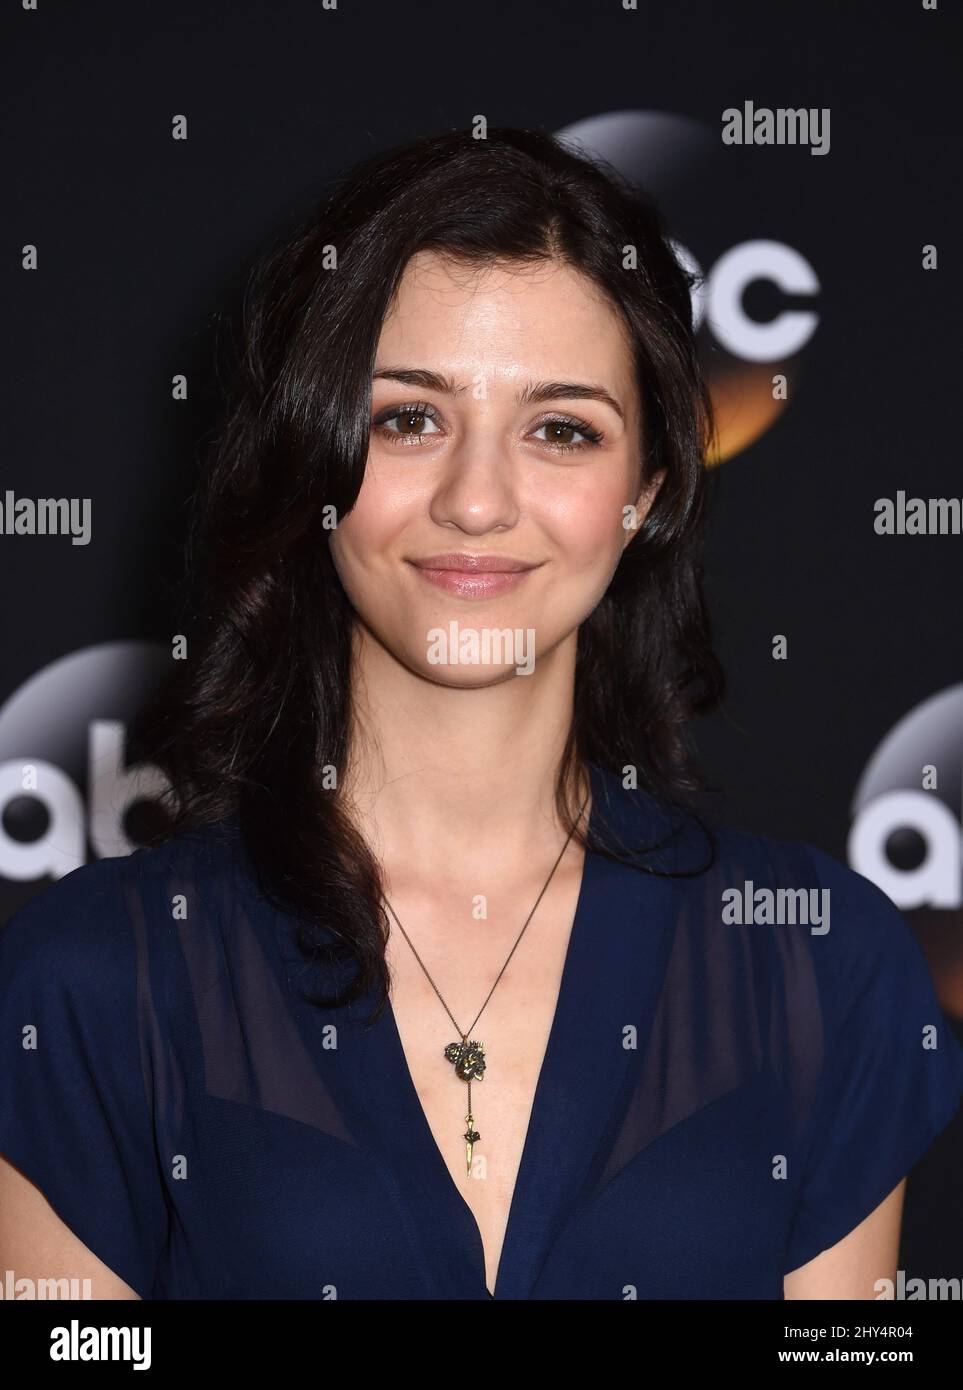 Katie Findlay attending the ABC Summer Press Tour in Beverly Hills, California. Stock Photo